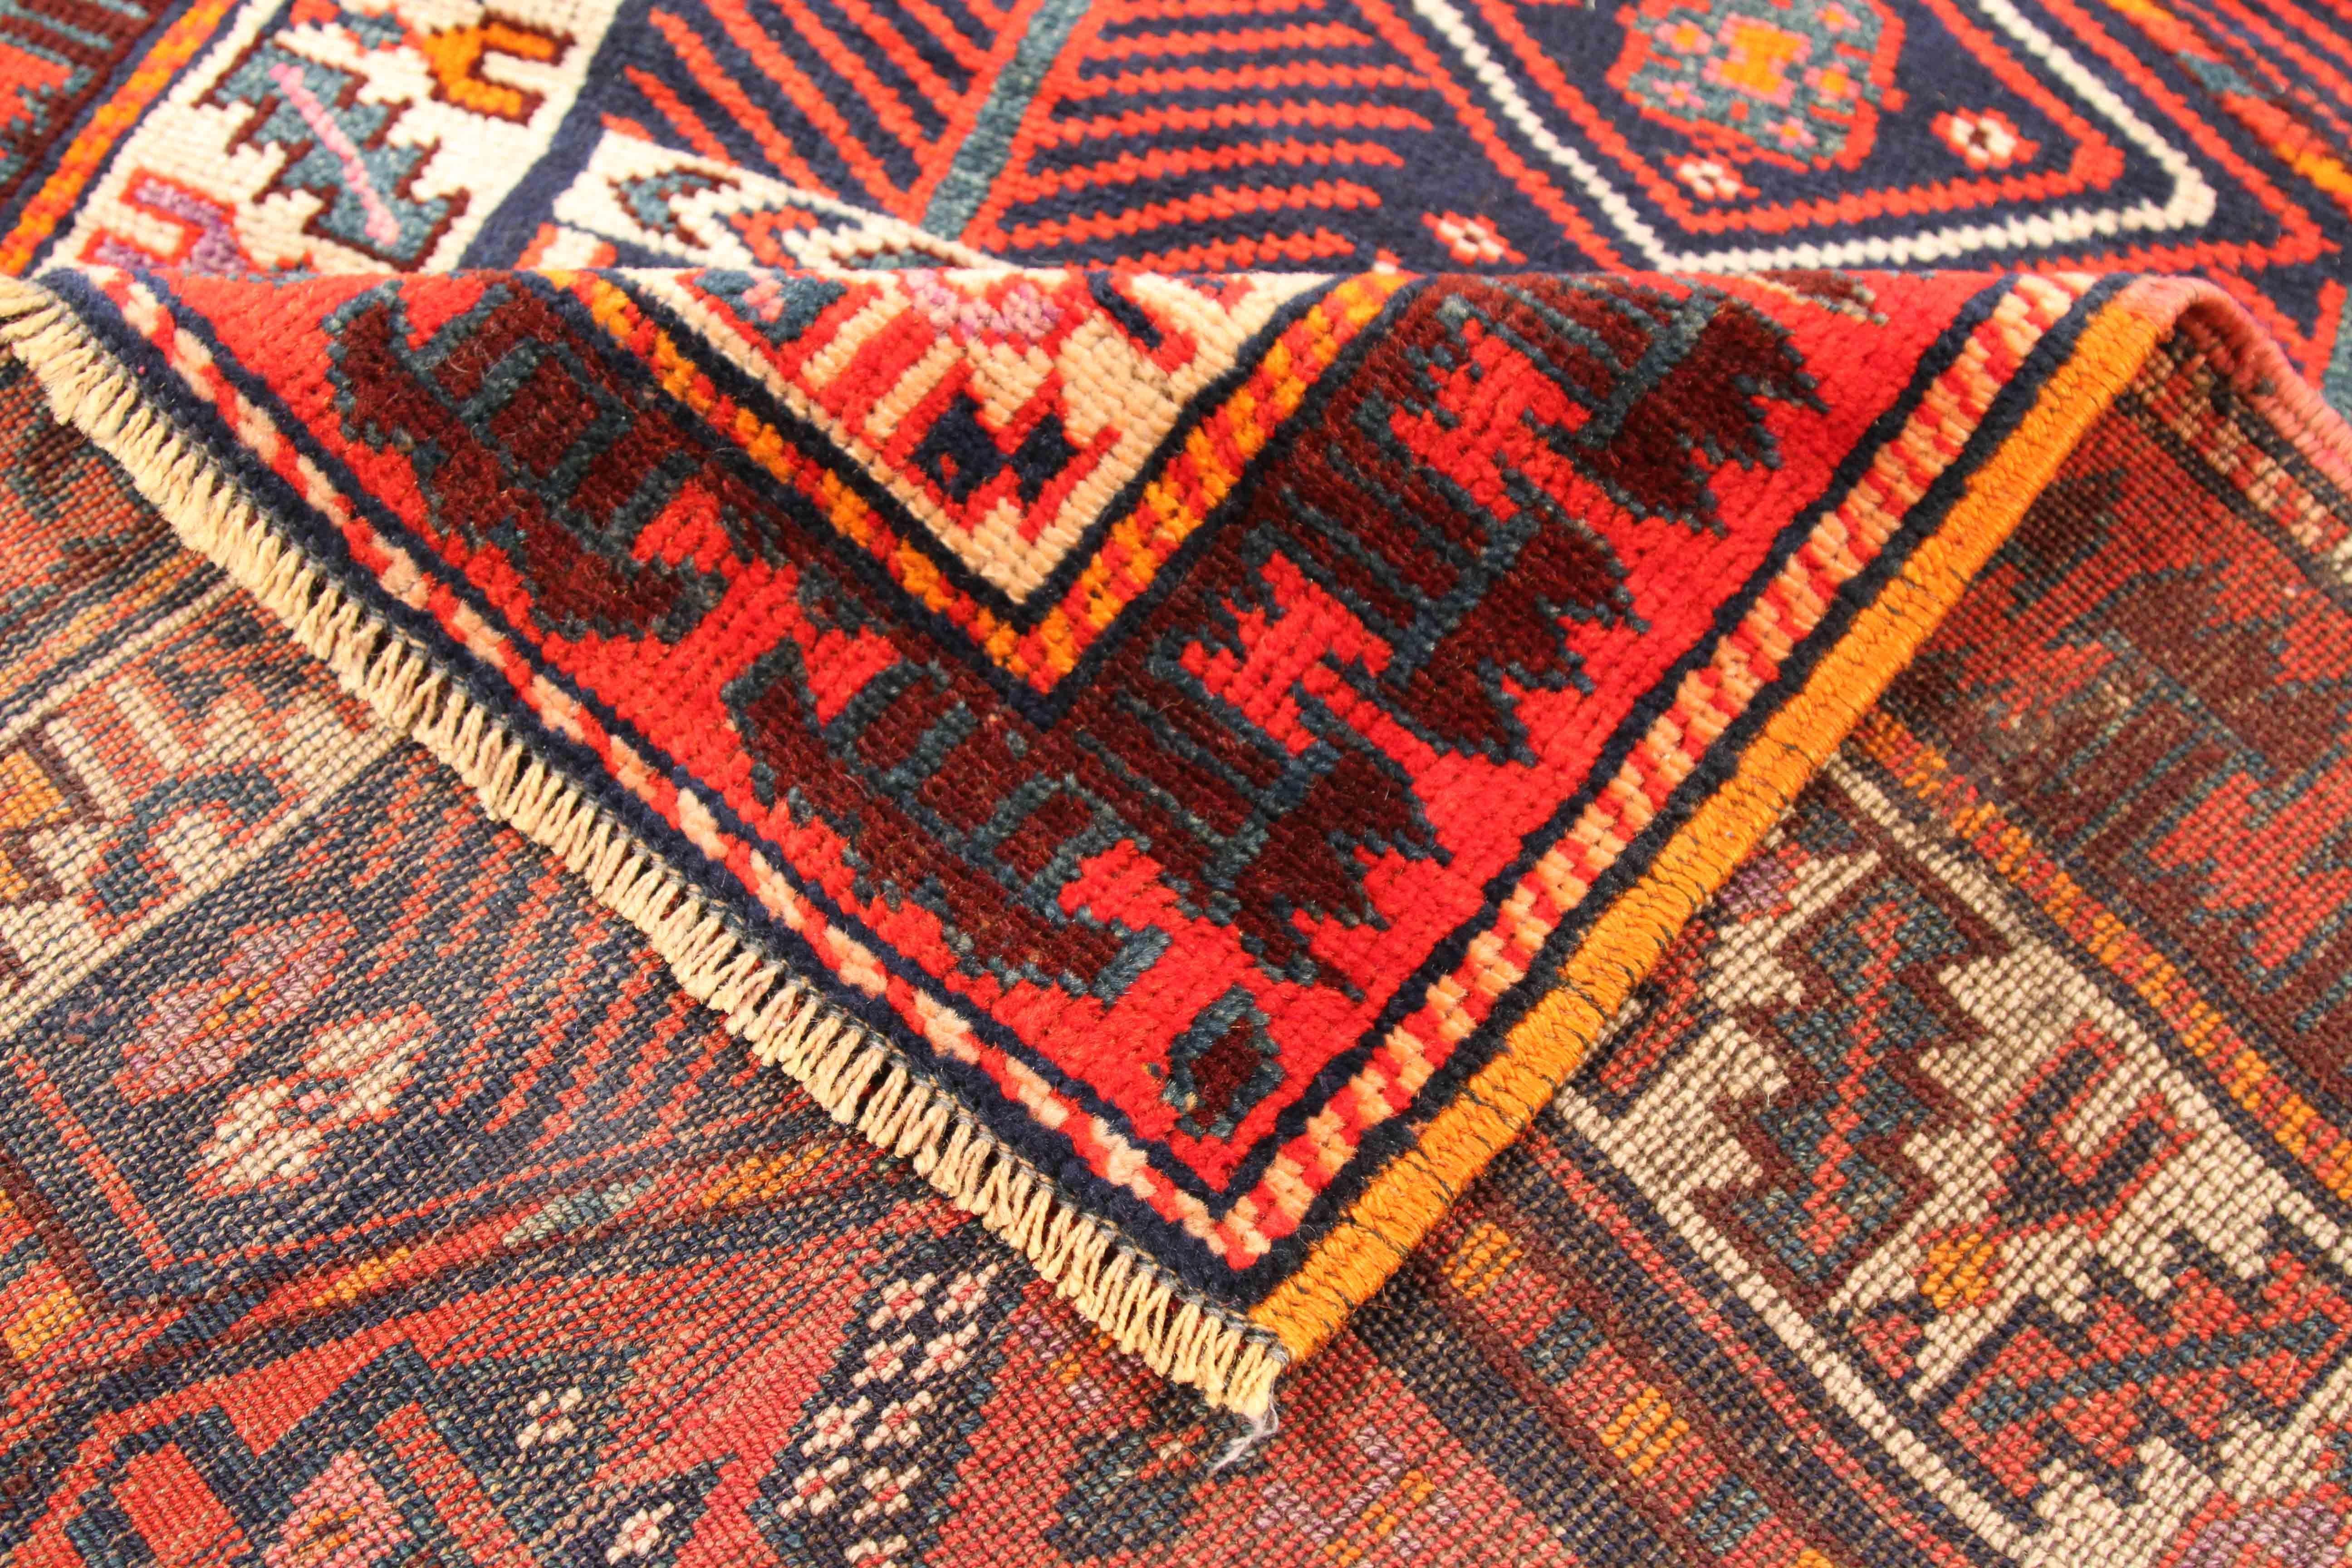 Antique Azerbaijan area rug with extended length. Its dimension runs 2’10” x 23’3” which works great for long entryways and hallways. It features a tribal design consisting of geometric patterns in traditional colors such as red, black, and orange.